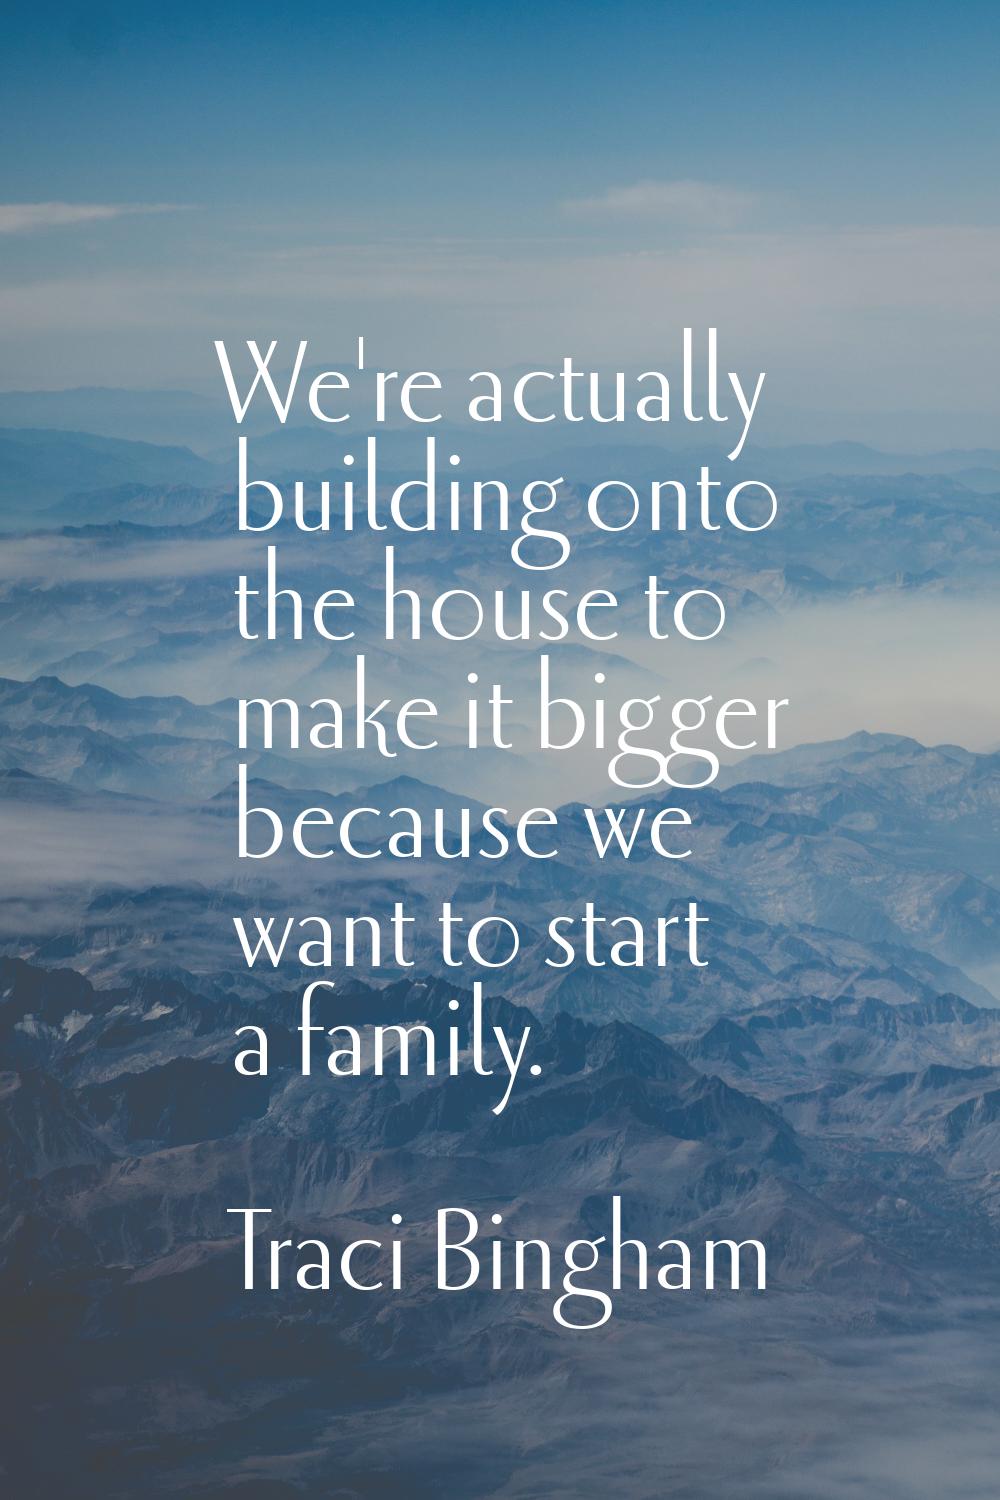 We're actually building onto the house to make it bigger because we want to start a family.